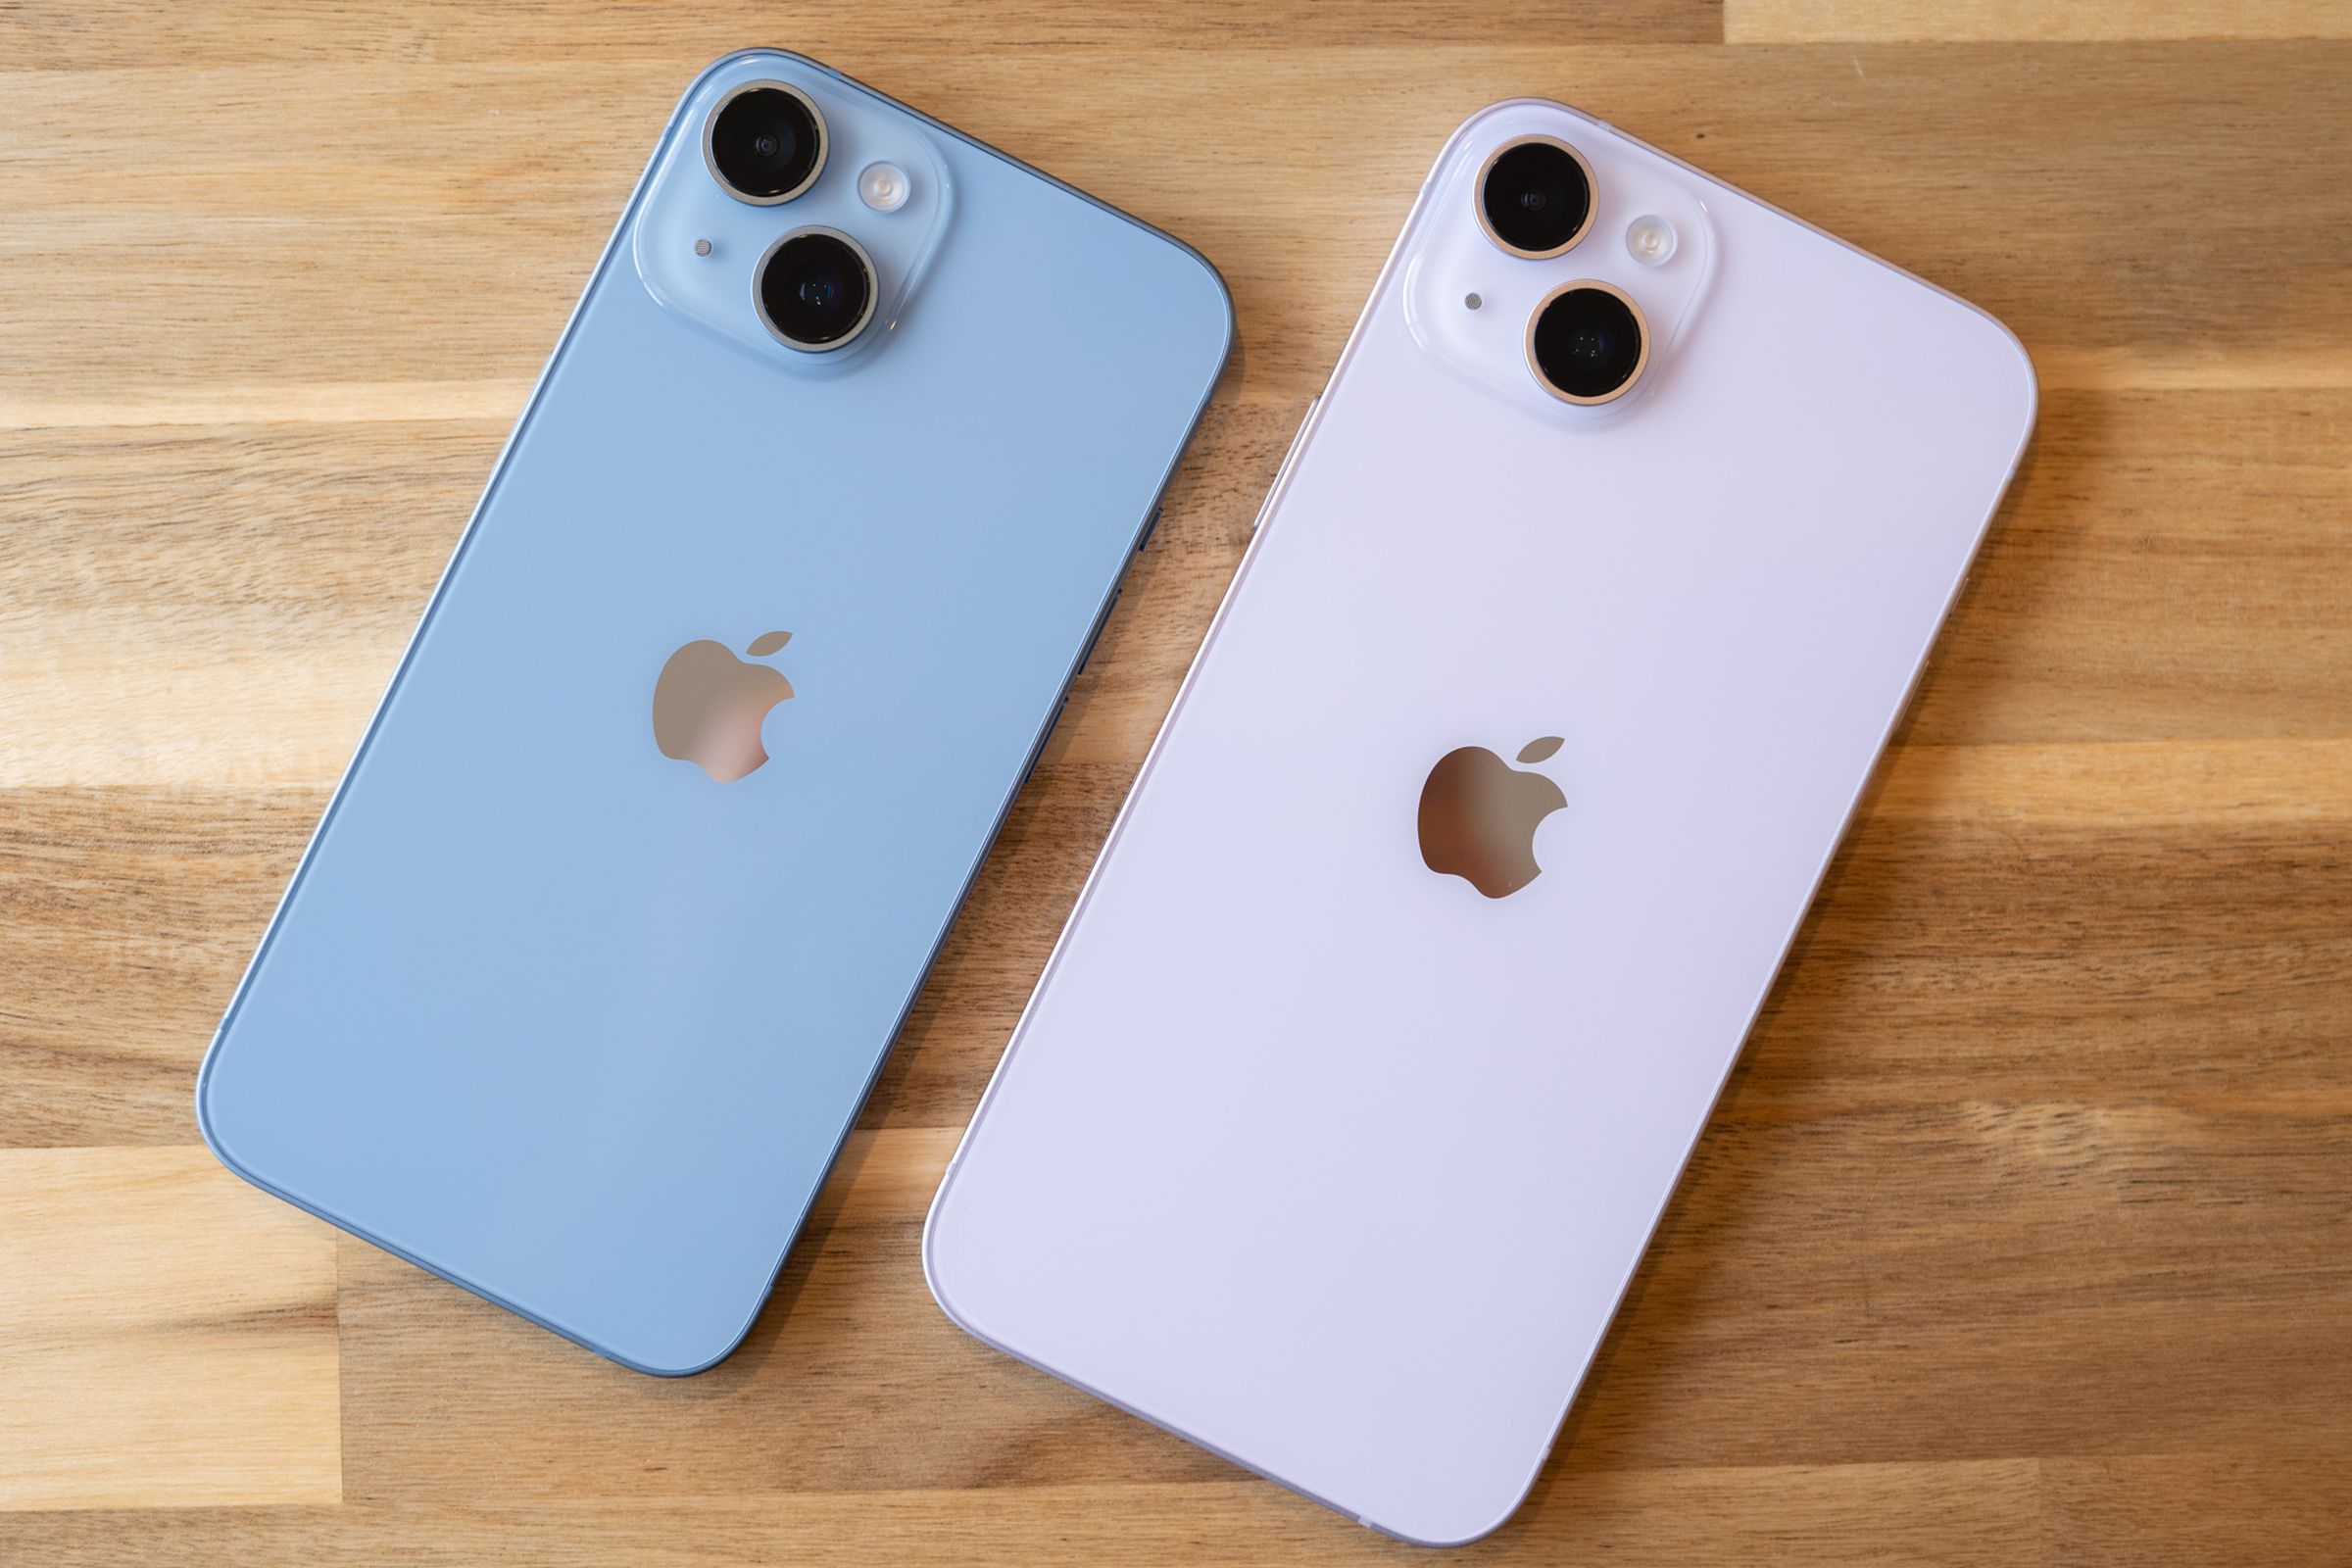 iPhone 14 in blue next to iPhone 14 Plus in purple